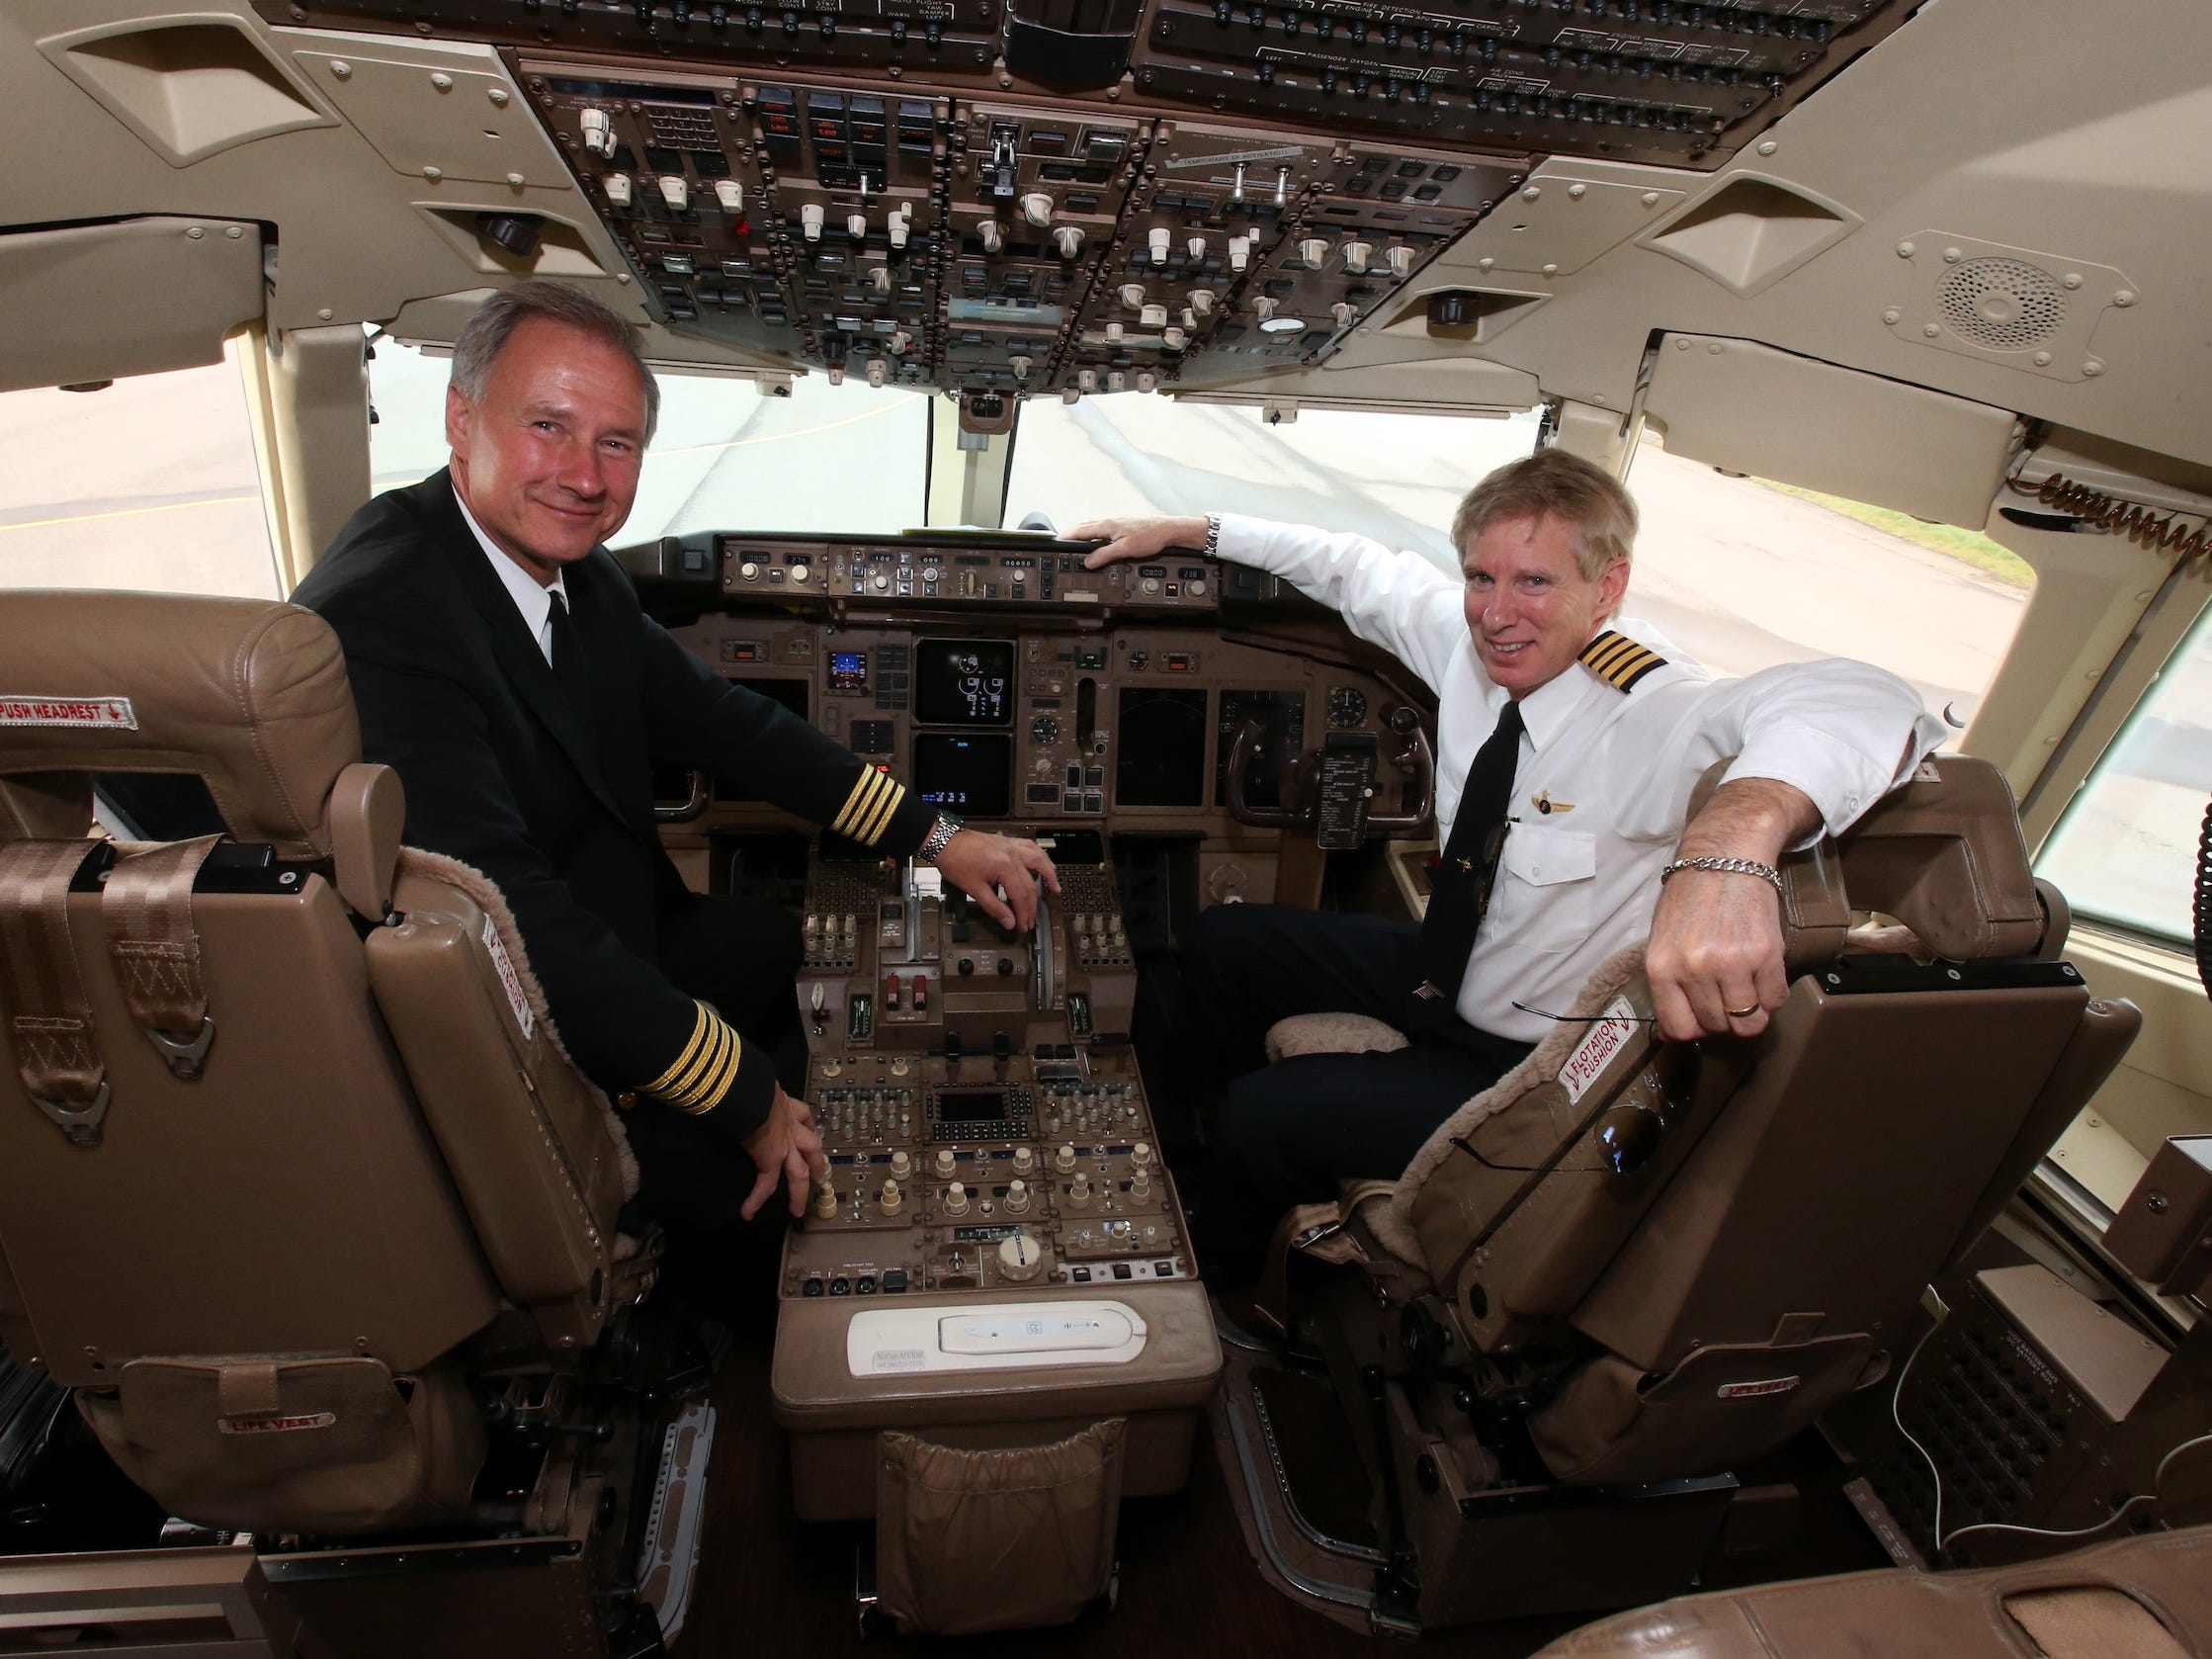 Trump&#39;s personal pilots in the 757 cockpit.